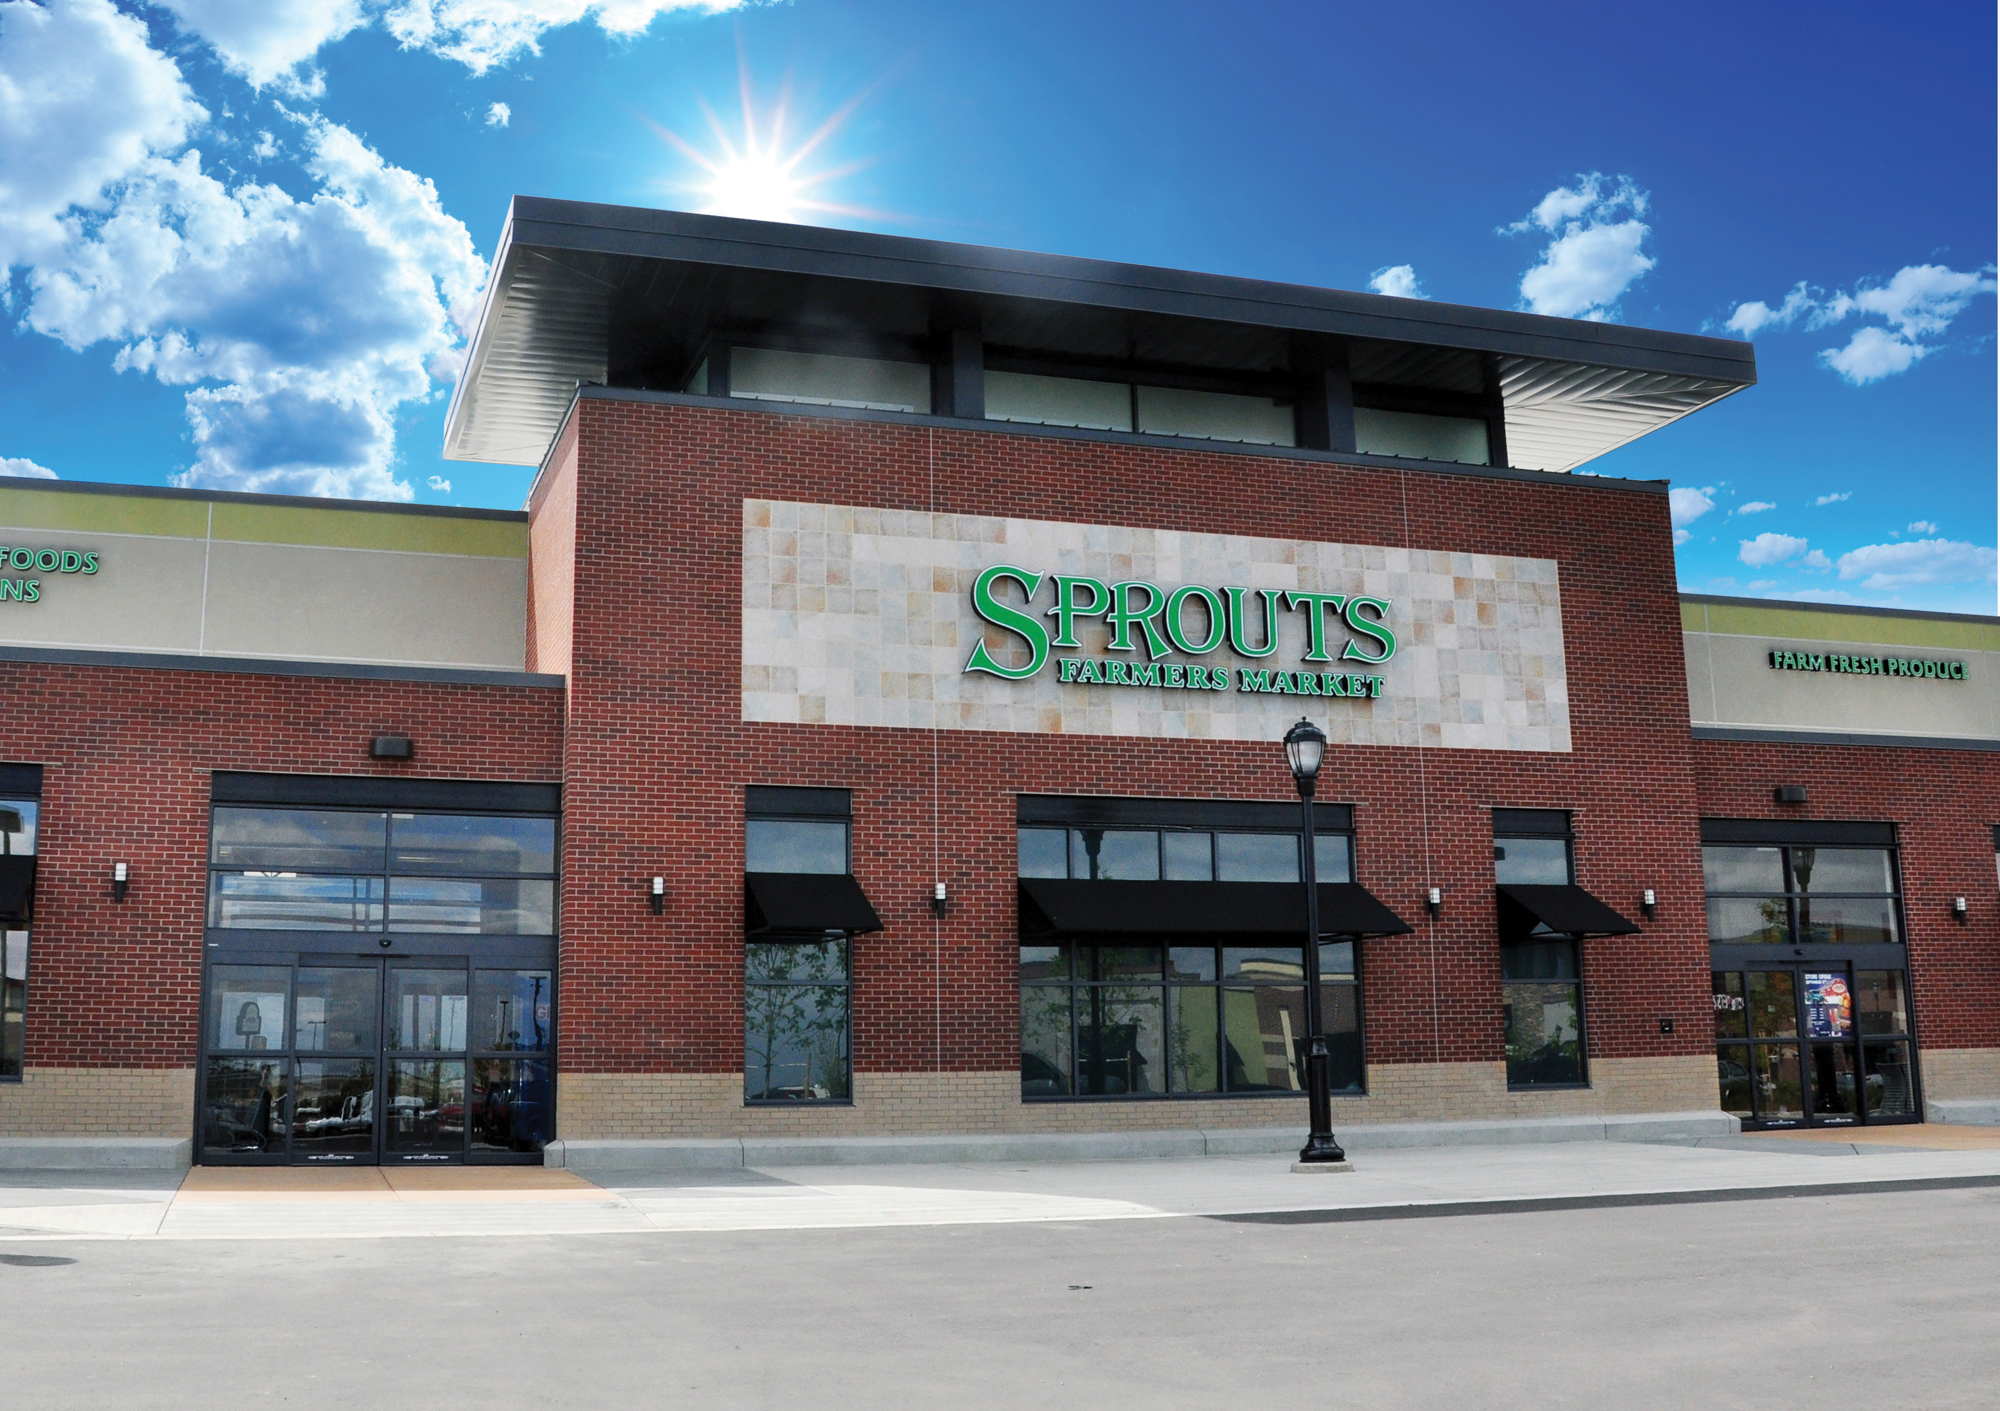 Phoenix-based Sprouts Farmers Market operates nearly 300 stores in 16 states, including five in Florida.